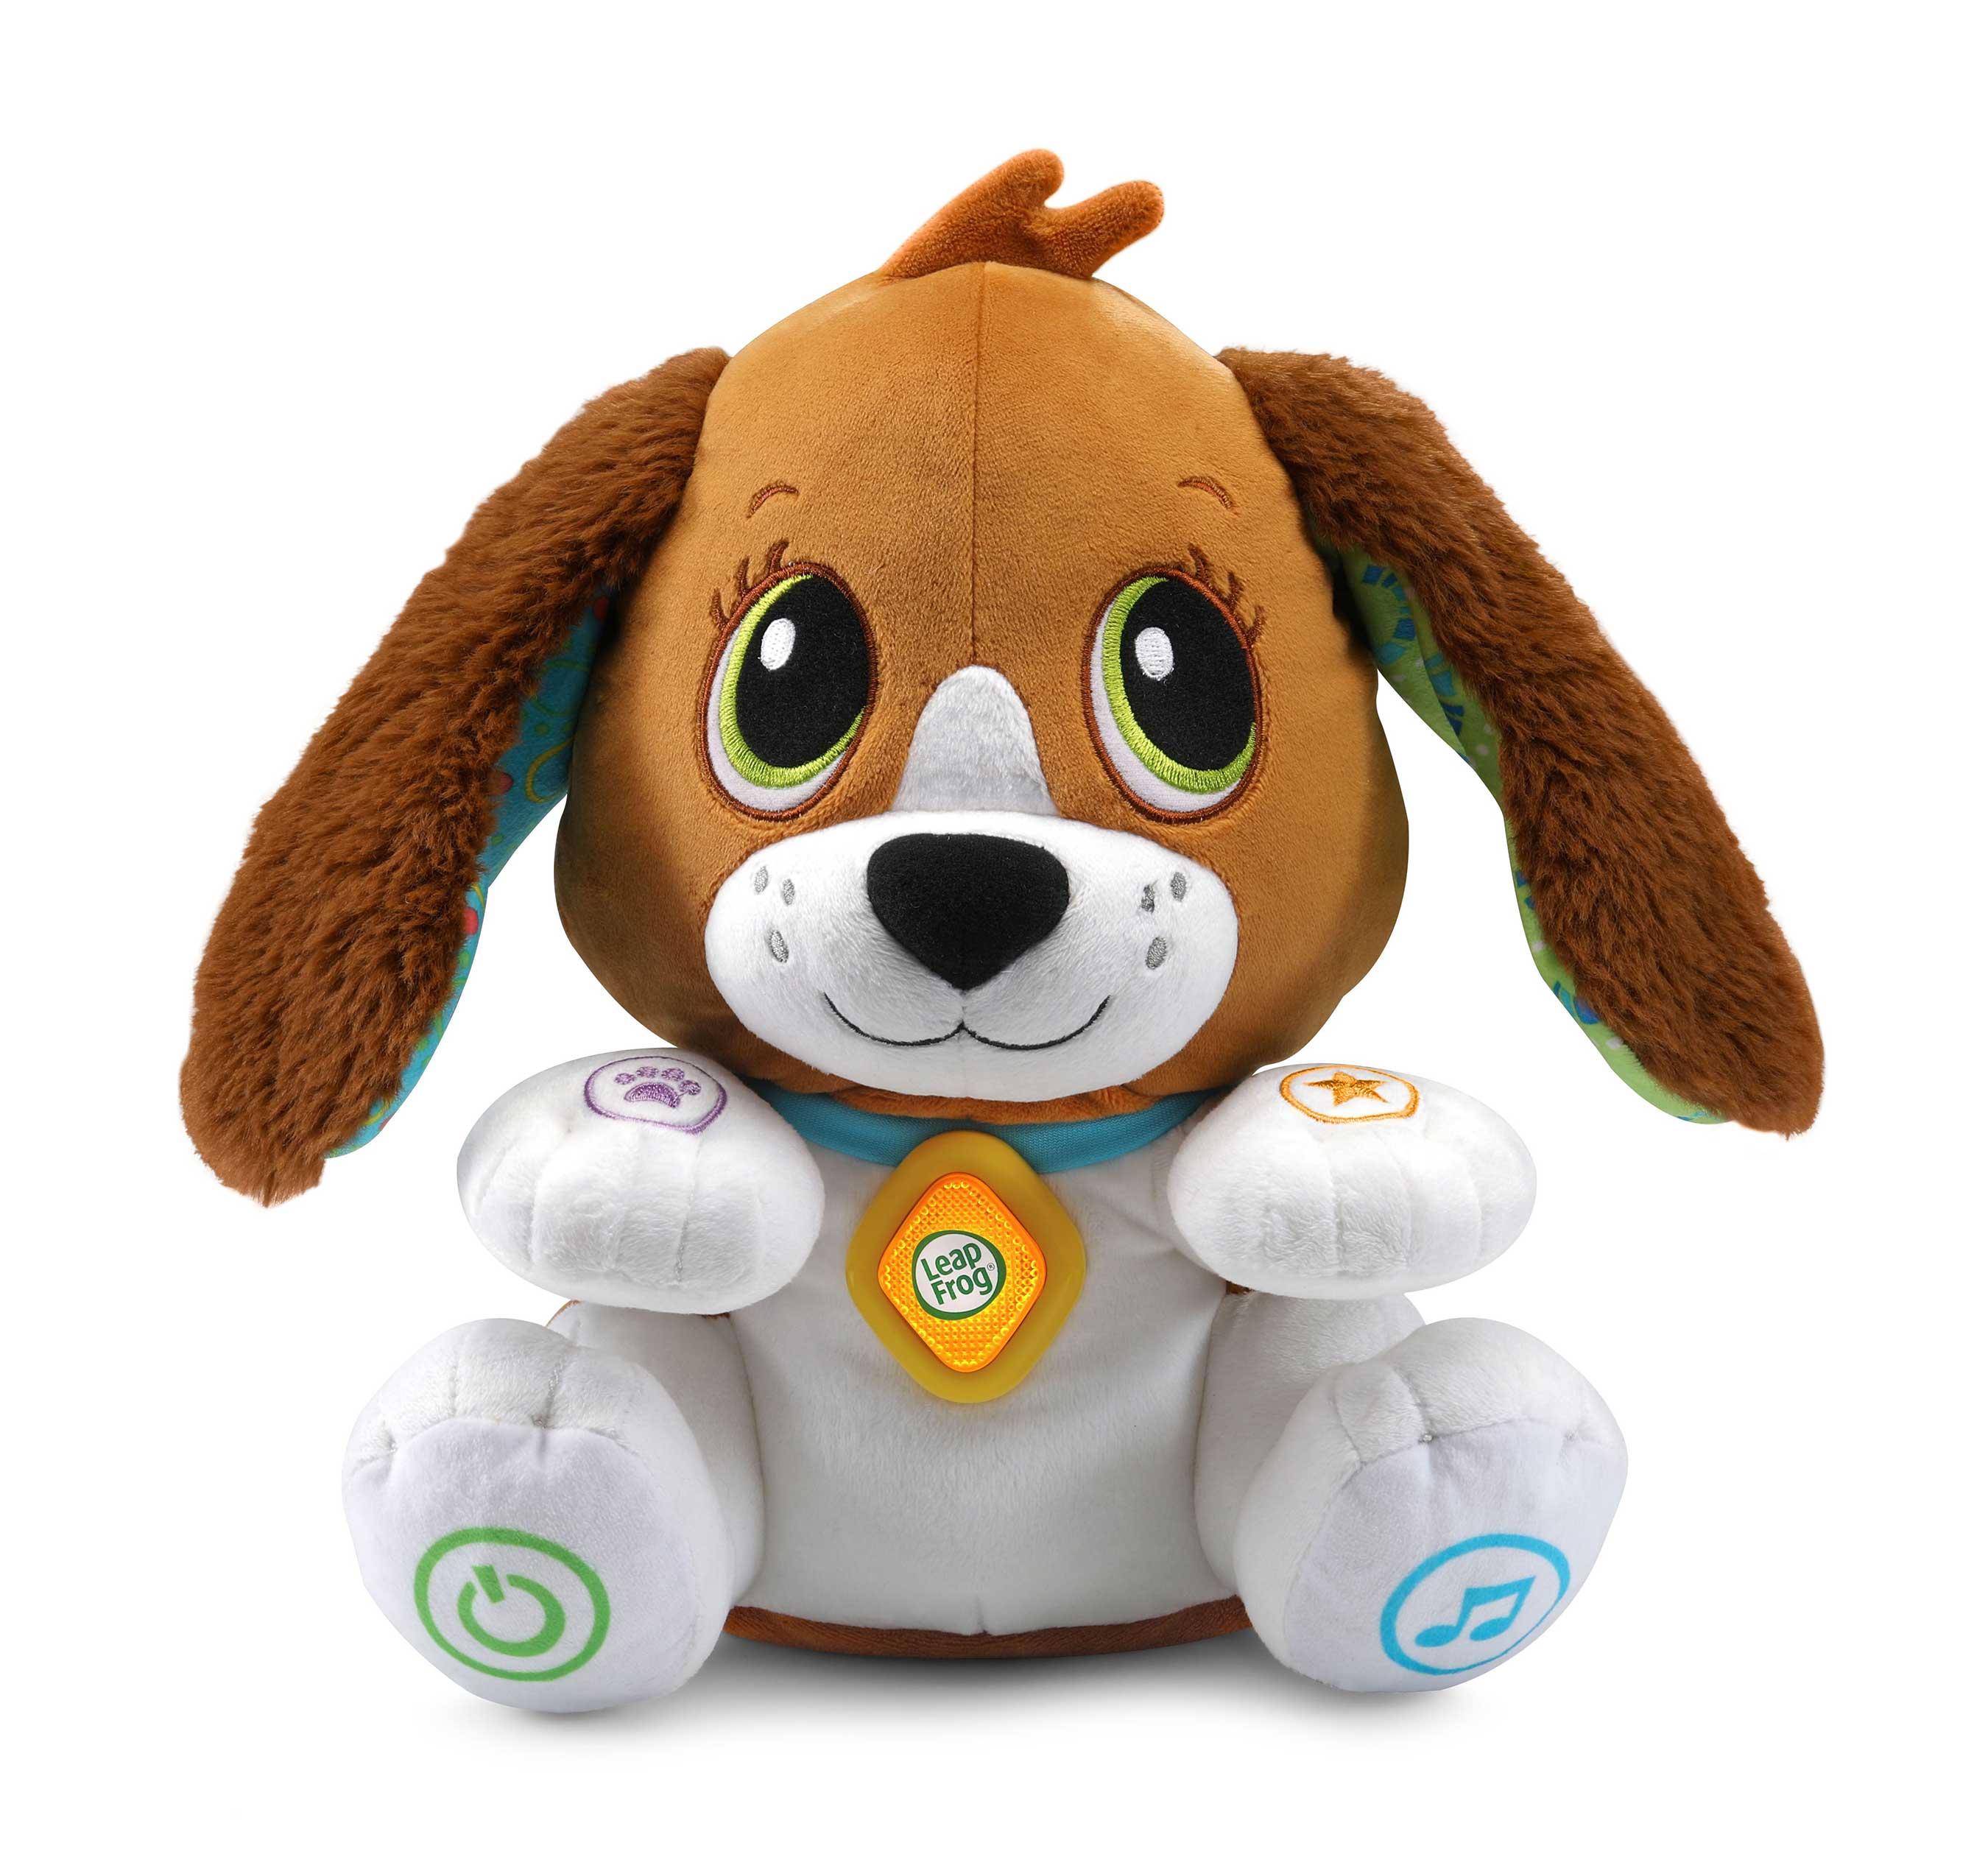 LeapFrog® introduces new infant and preschool learning toys, such as the Speak & Learn Puppy™.